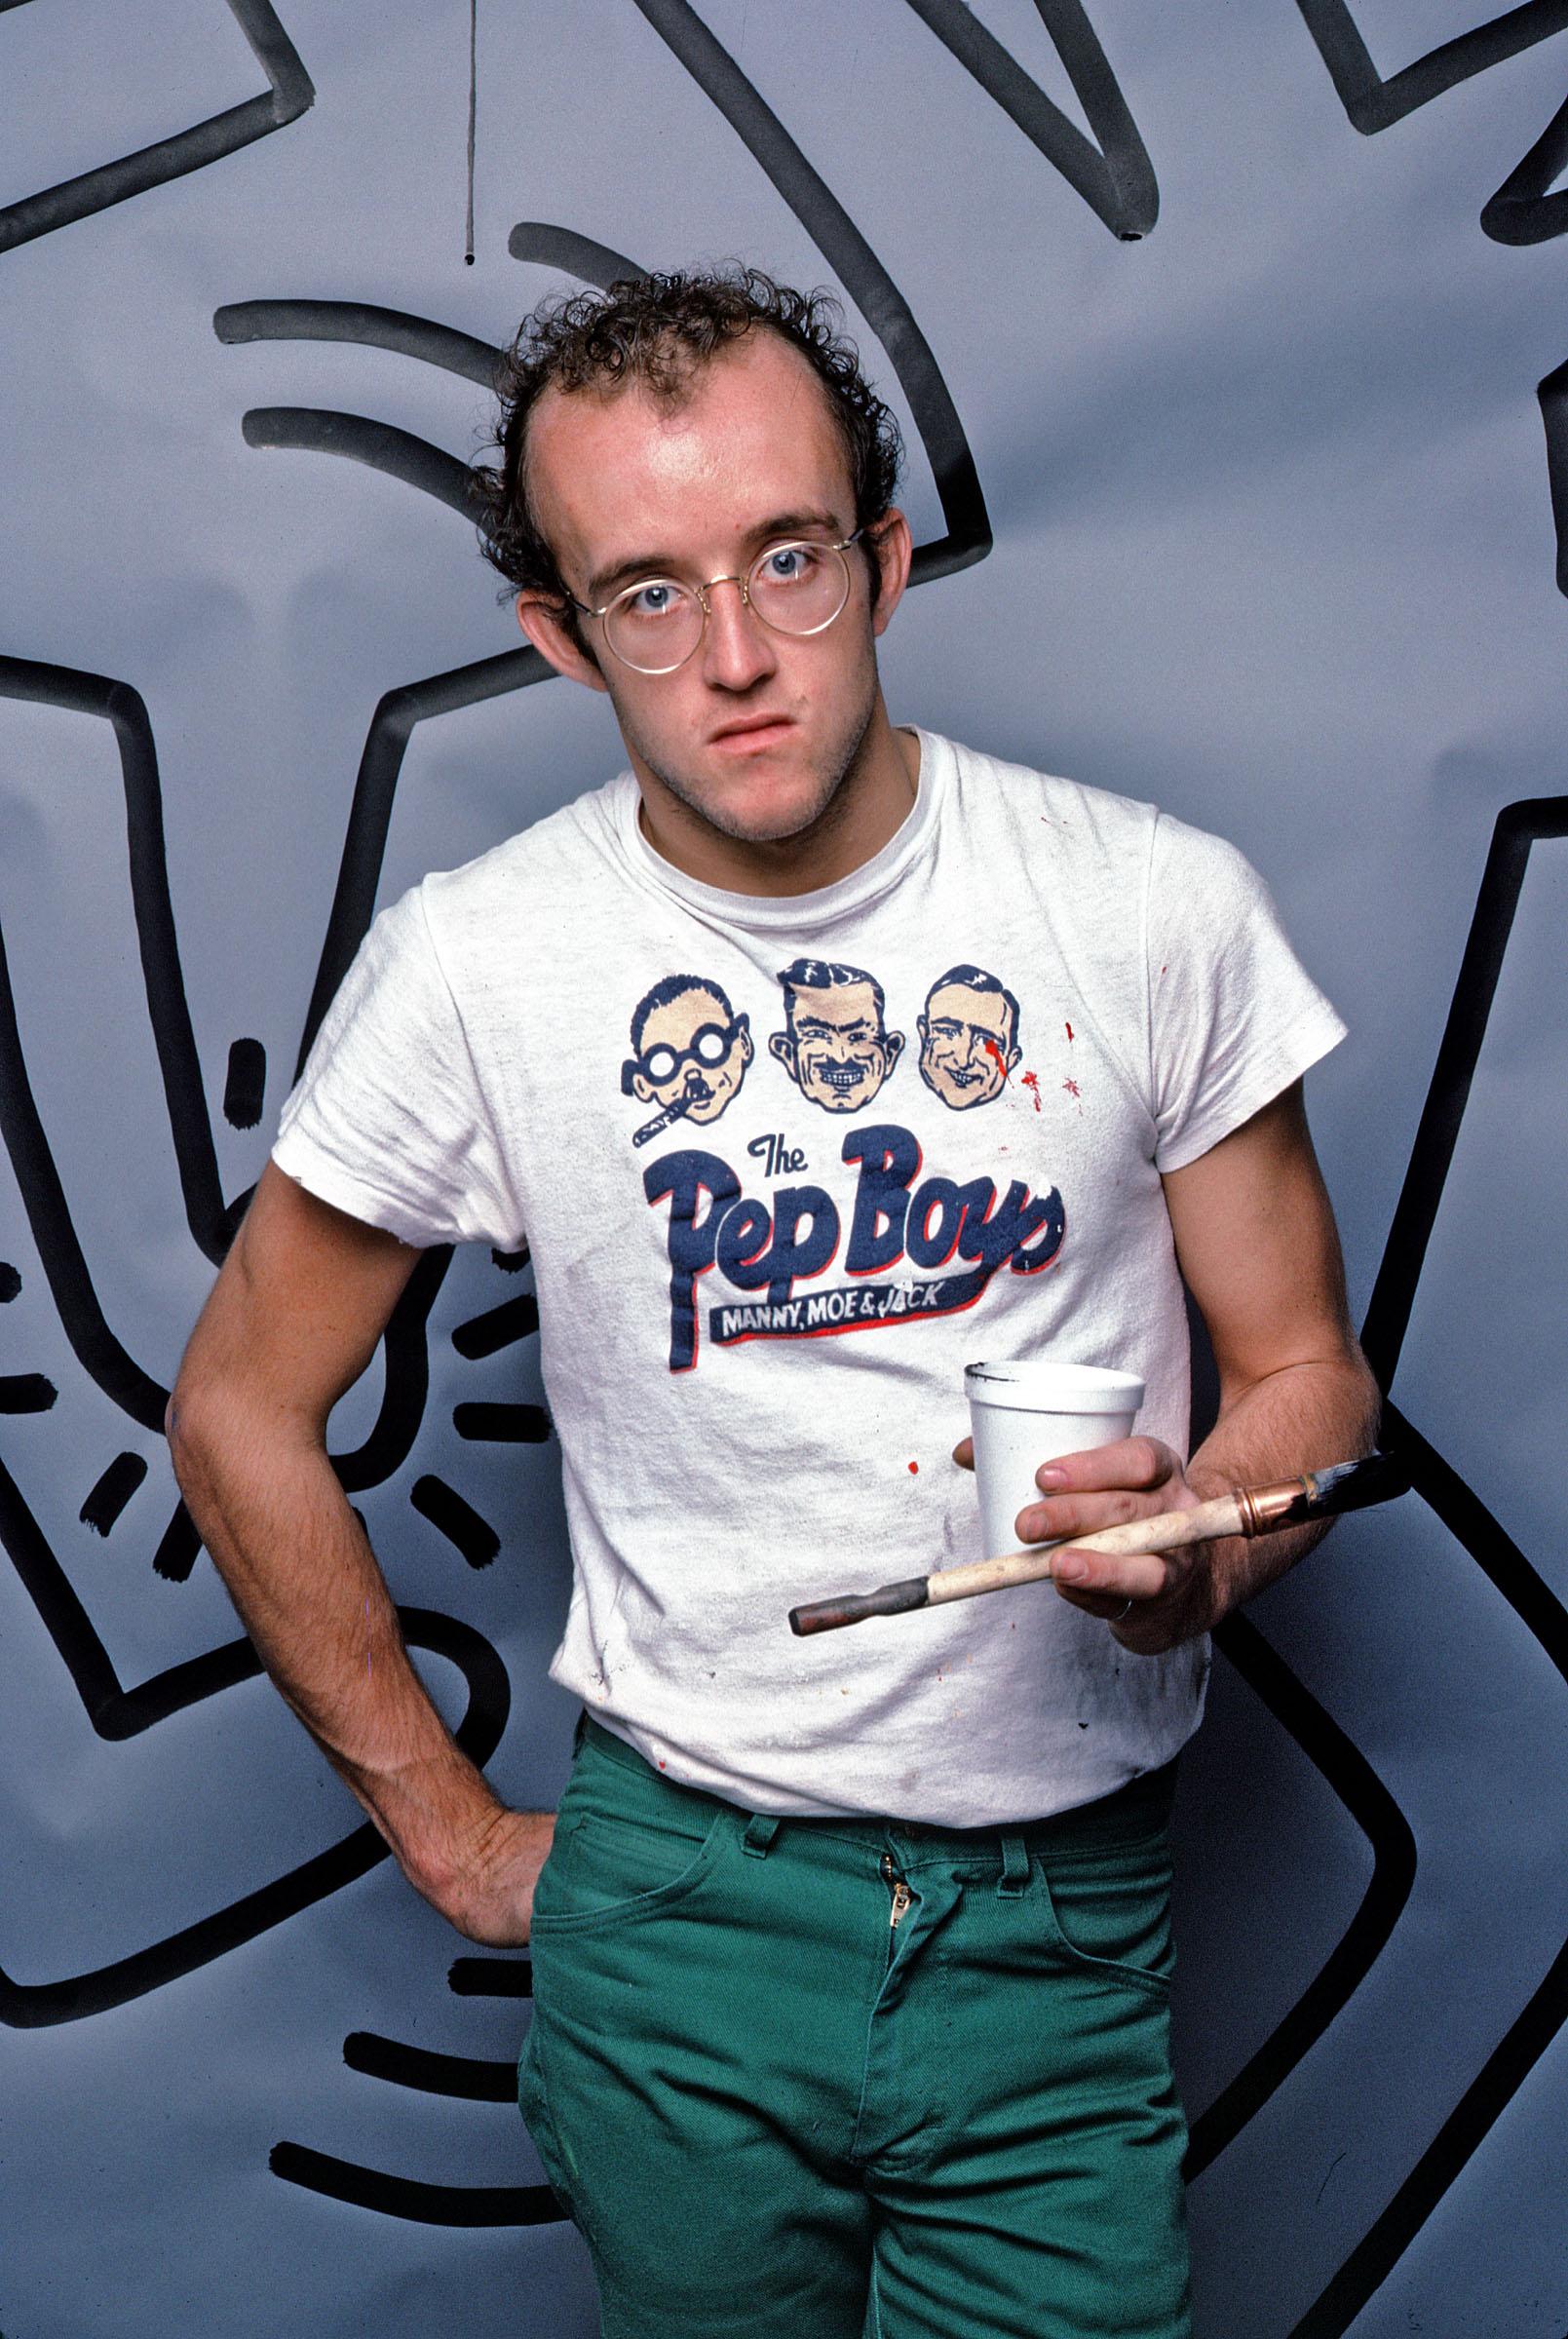 Jack Mitchell Color Photograph - Graffiti Artist Keith Haring, Color 17 x 22" Exhibition Photograph 